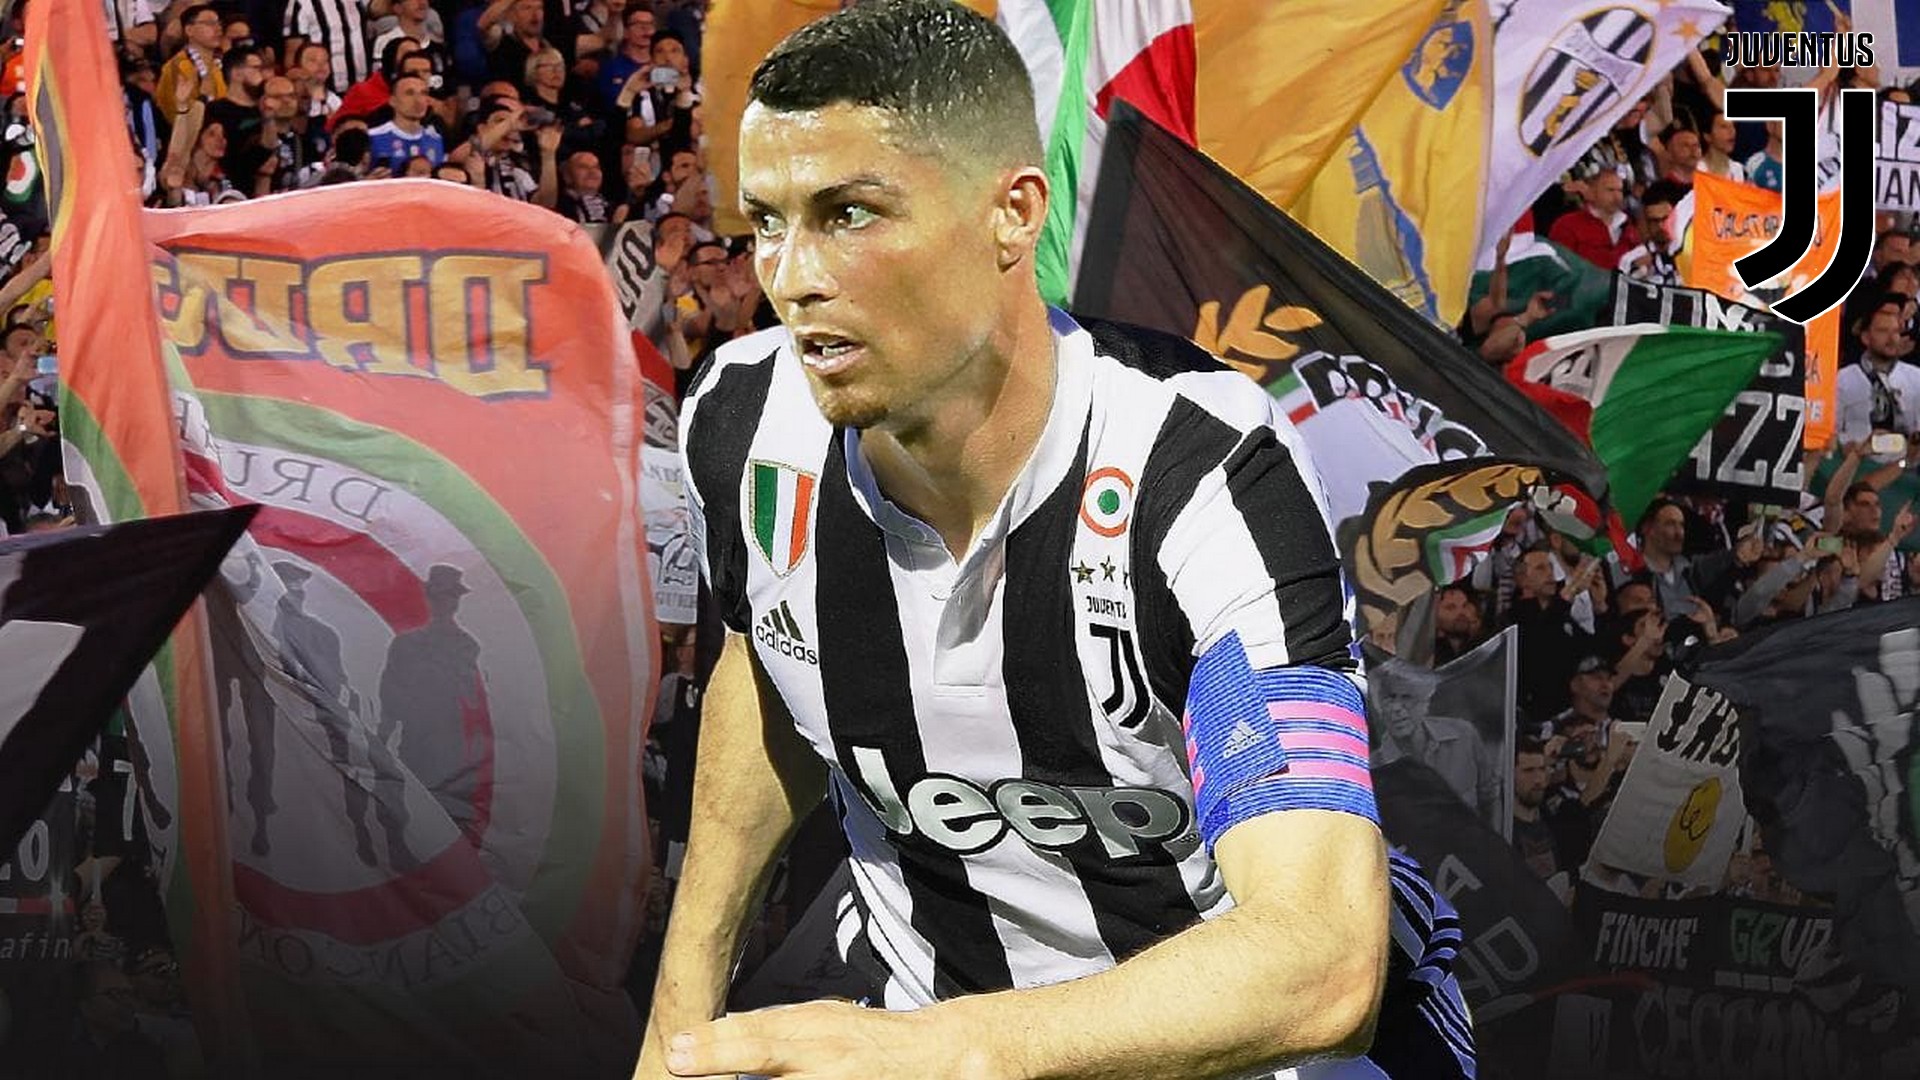 Wallpapers HD C Ronaldo Juventus With Resolution 1920X1080 pixel. You can make this wallpaper for your Mac or Windows Desktop Background, iPhone, Android or Tablet and another Smartphone device for free